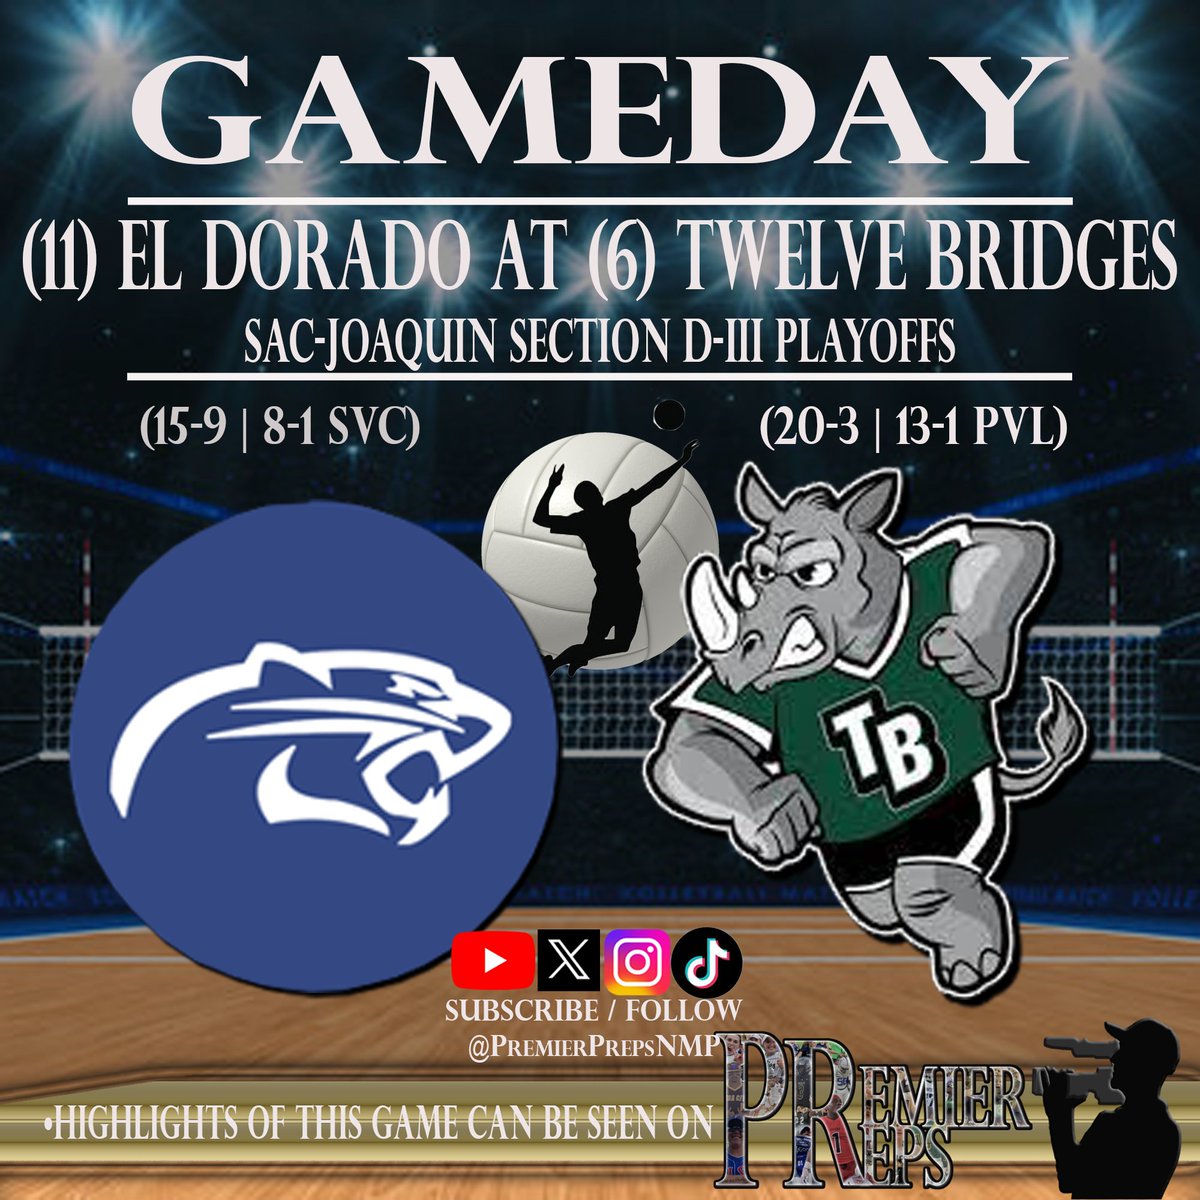 A double-dipper today at Twelve Bridges High School! 1st-The Rhinos host unbeaten Sutter on the🥎field! THEN- The first playoff game in school history for @RhinosTbhs boys🏐as they take on El Dorado. Premier Preps will have highlights from both ➡️youtube.com/@PremierPreps